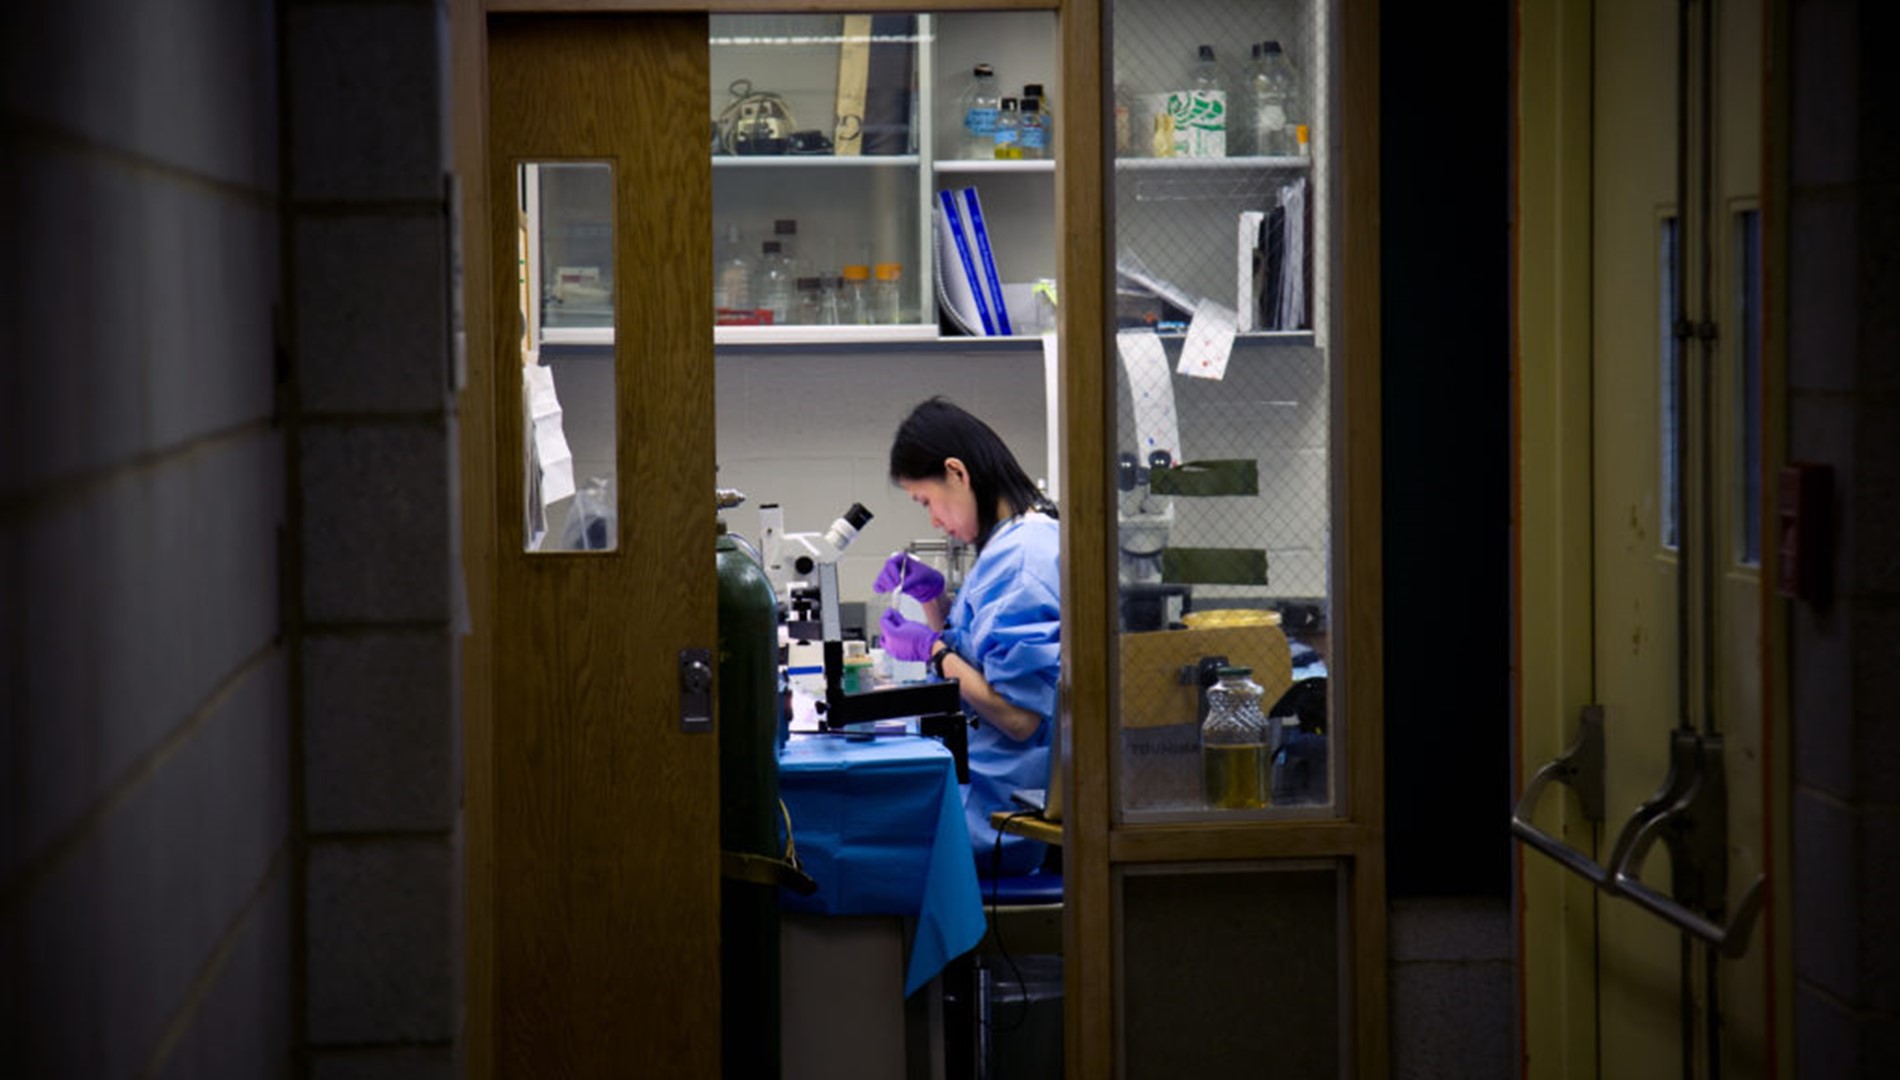 INTO DREW Female Student Doing Biology Research With Microscope Inside Lab Room 28124 1024X682